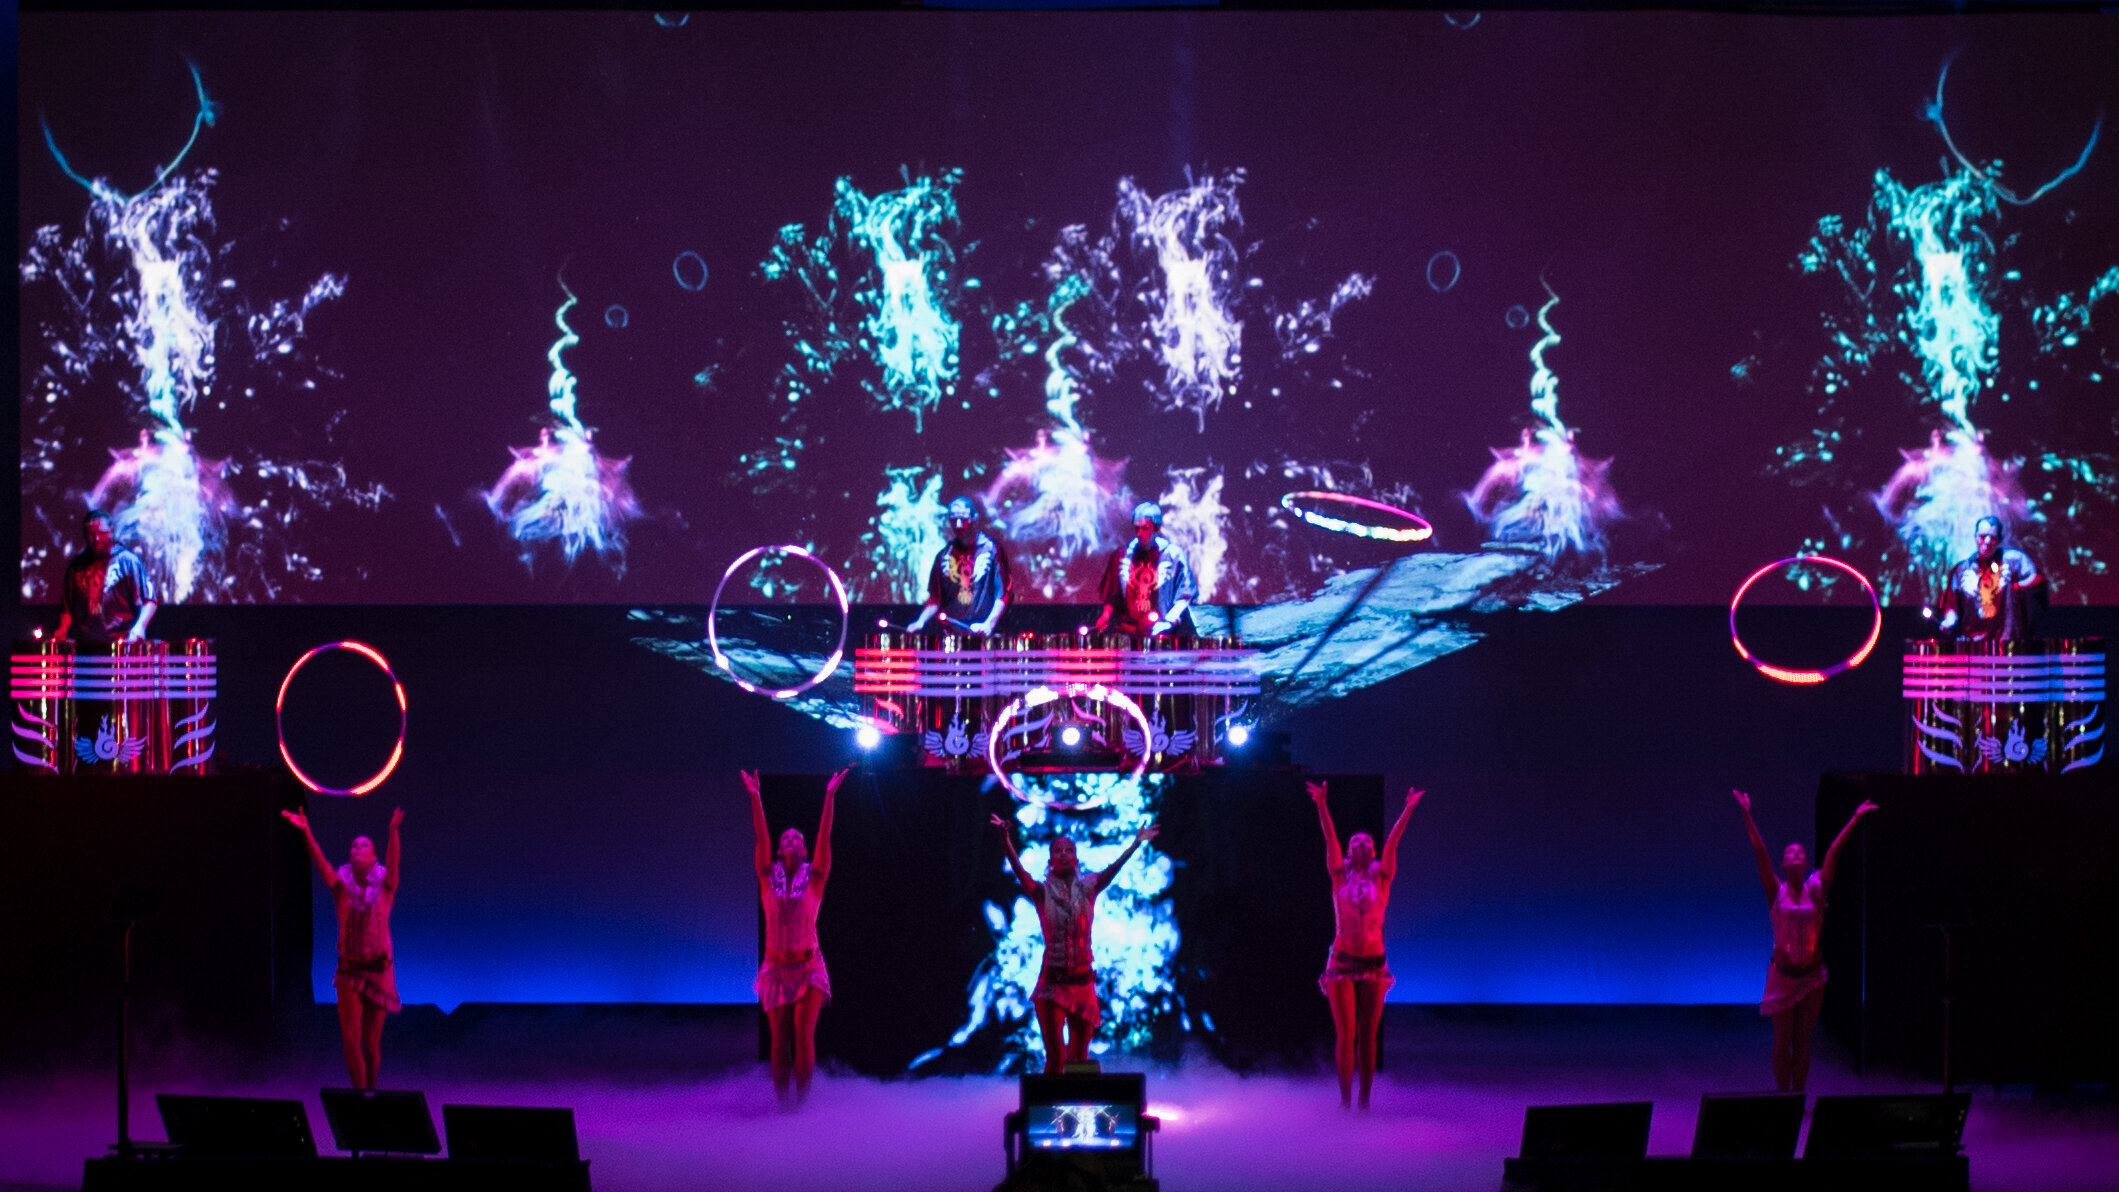 LED show including LED drums and interactive projections, Synergy Corporate Show, Vienna, Austria